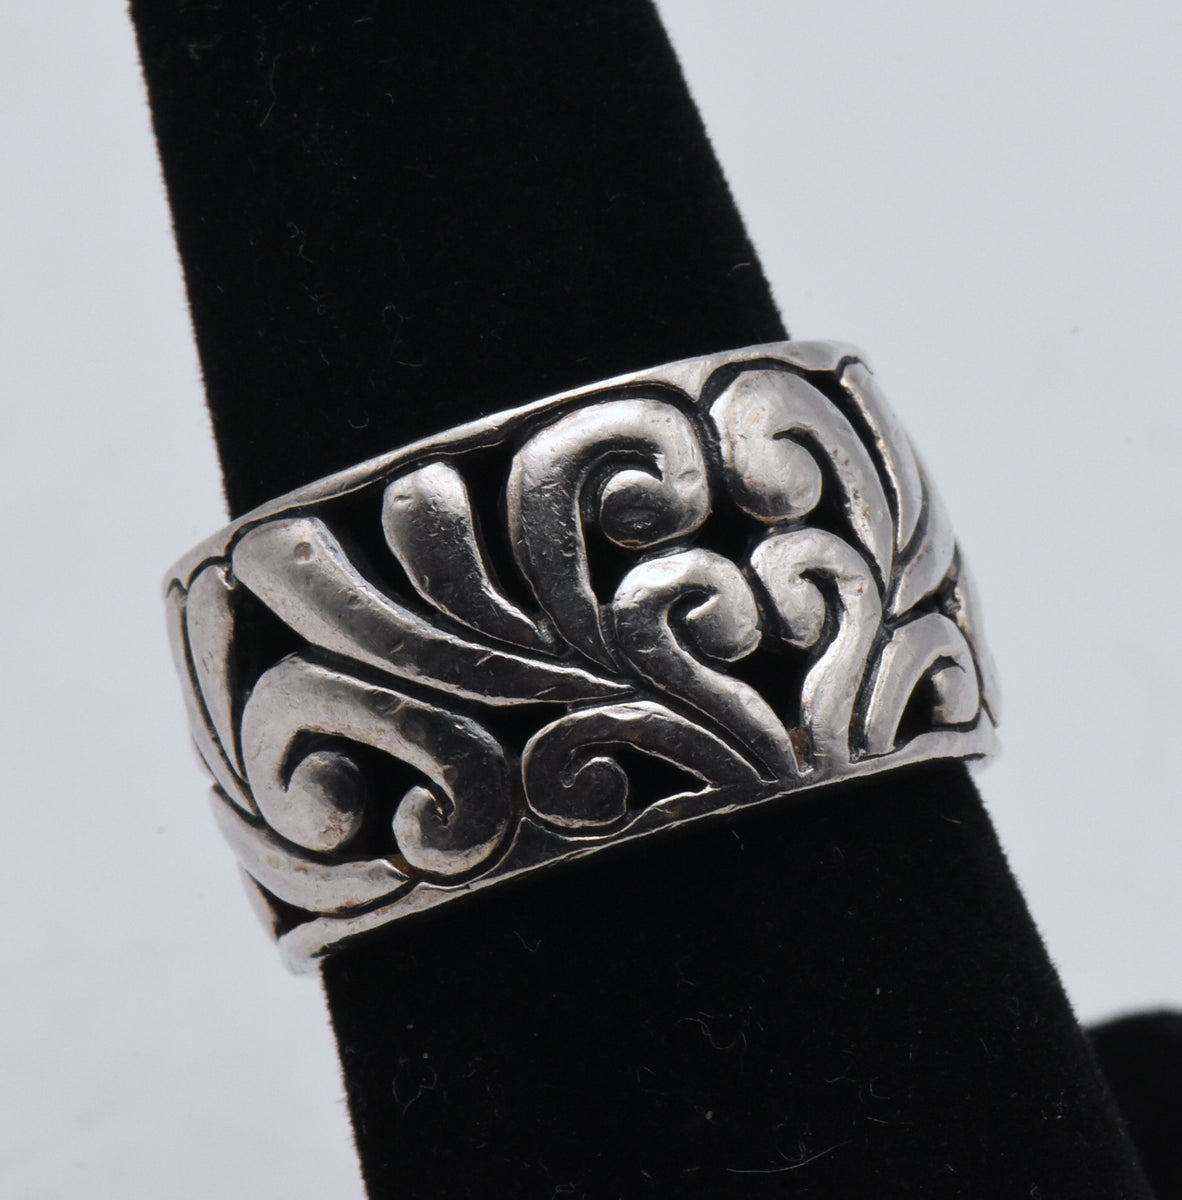 Premier Designs Silver and Black Hammered Metal Ring. Size 9.5 